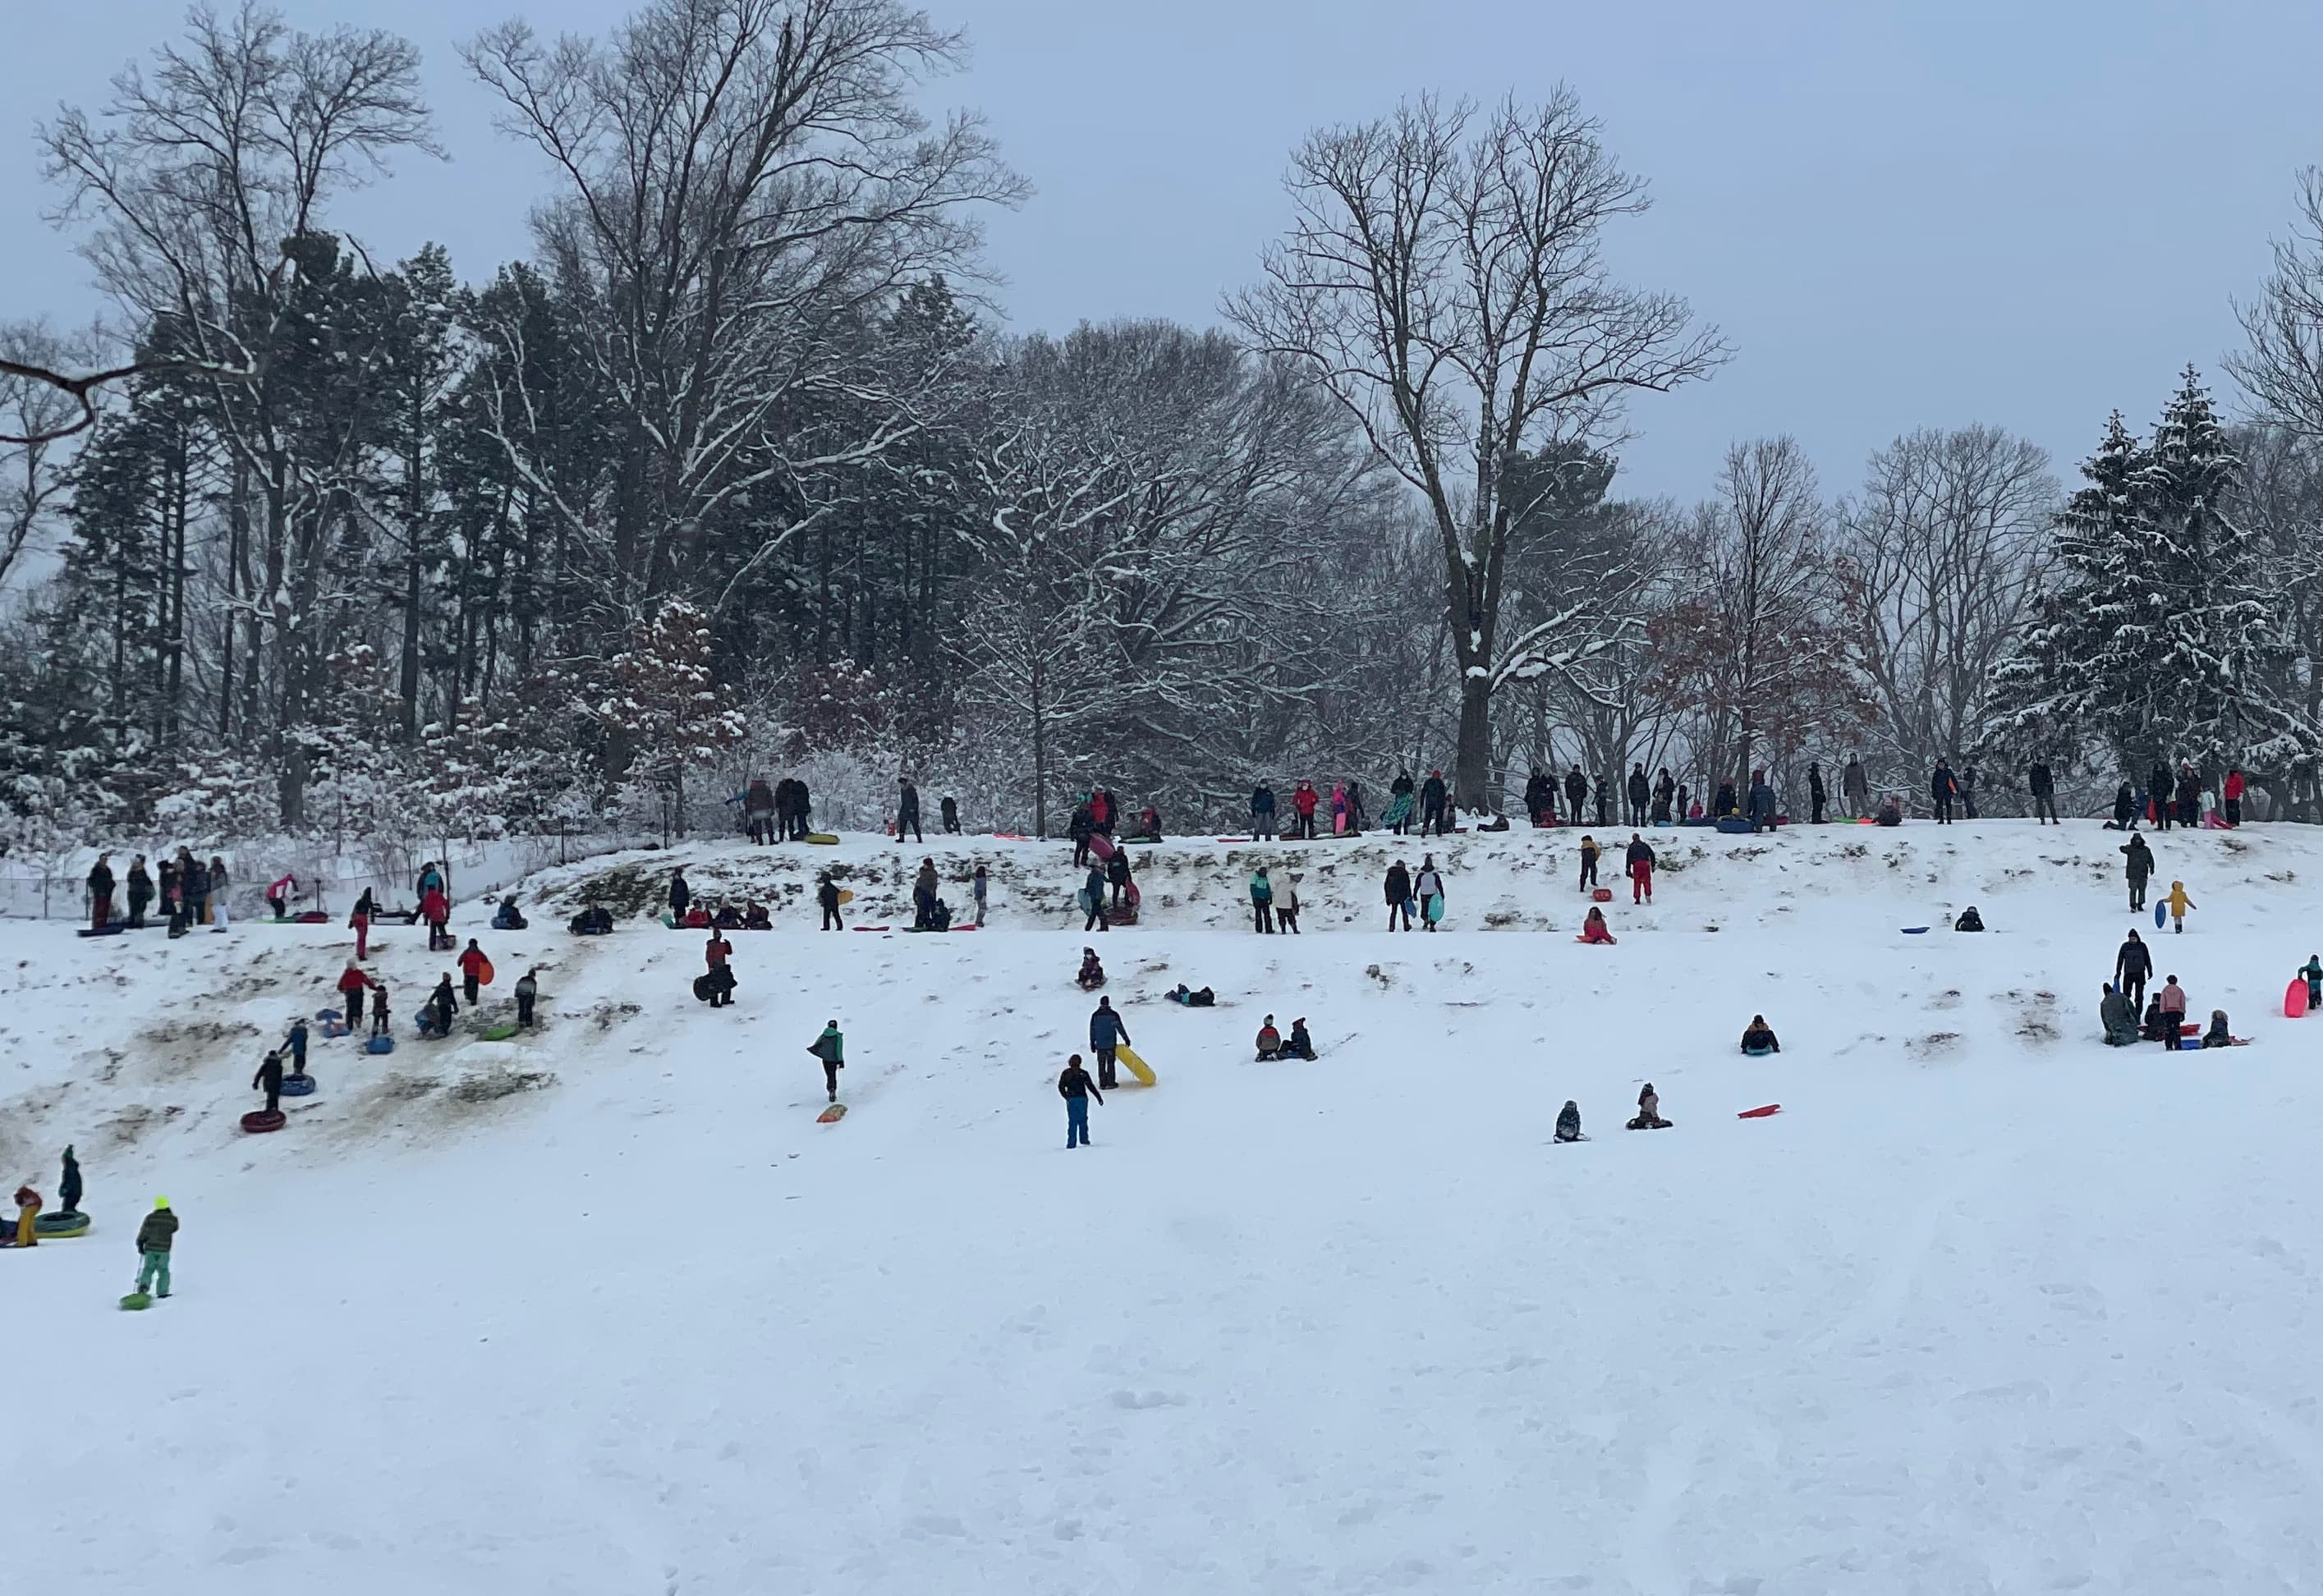 Dozens of families took to their sleds at Kingsley Park in Cambridge on Friday. The image shows kids sledding or climbing the hill while parents stand and watch. (Max Larkin/WBUR)